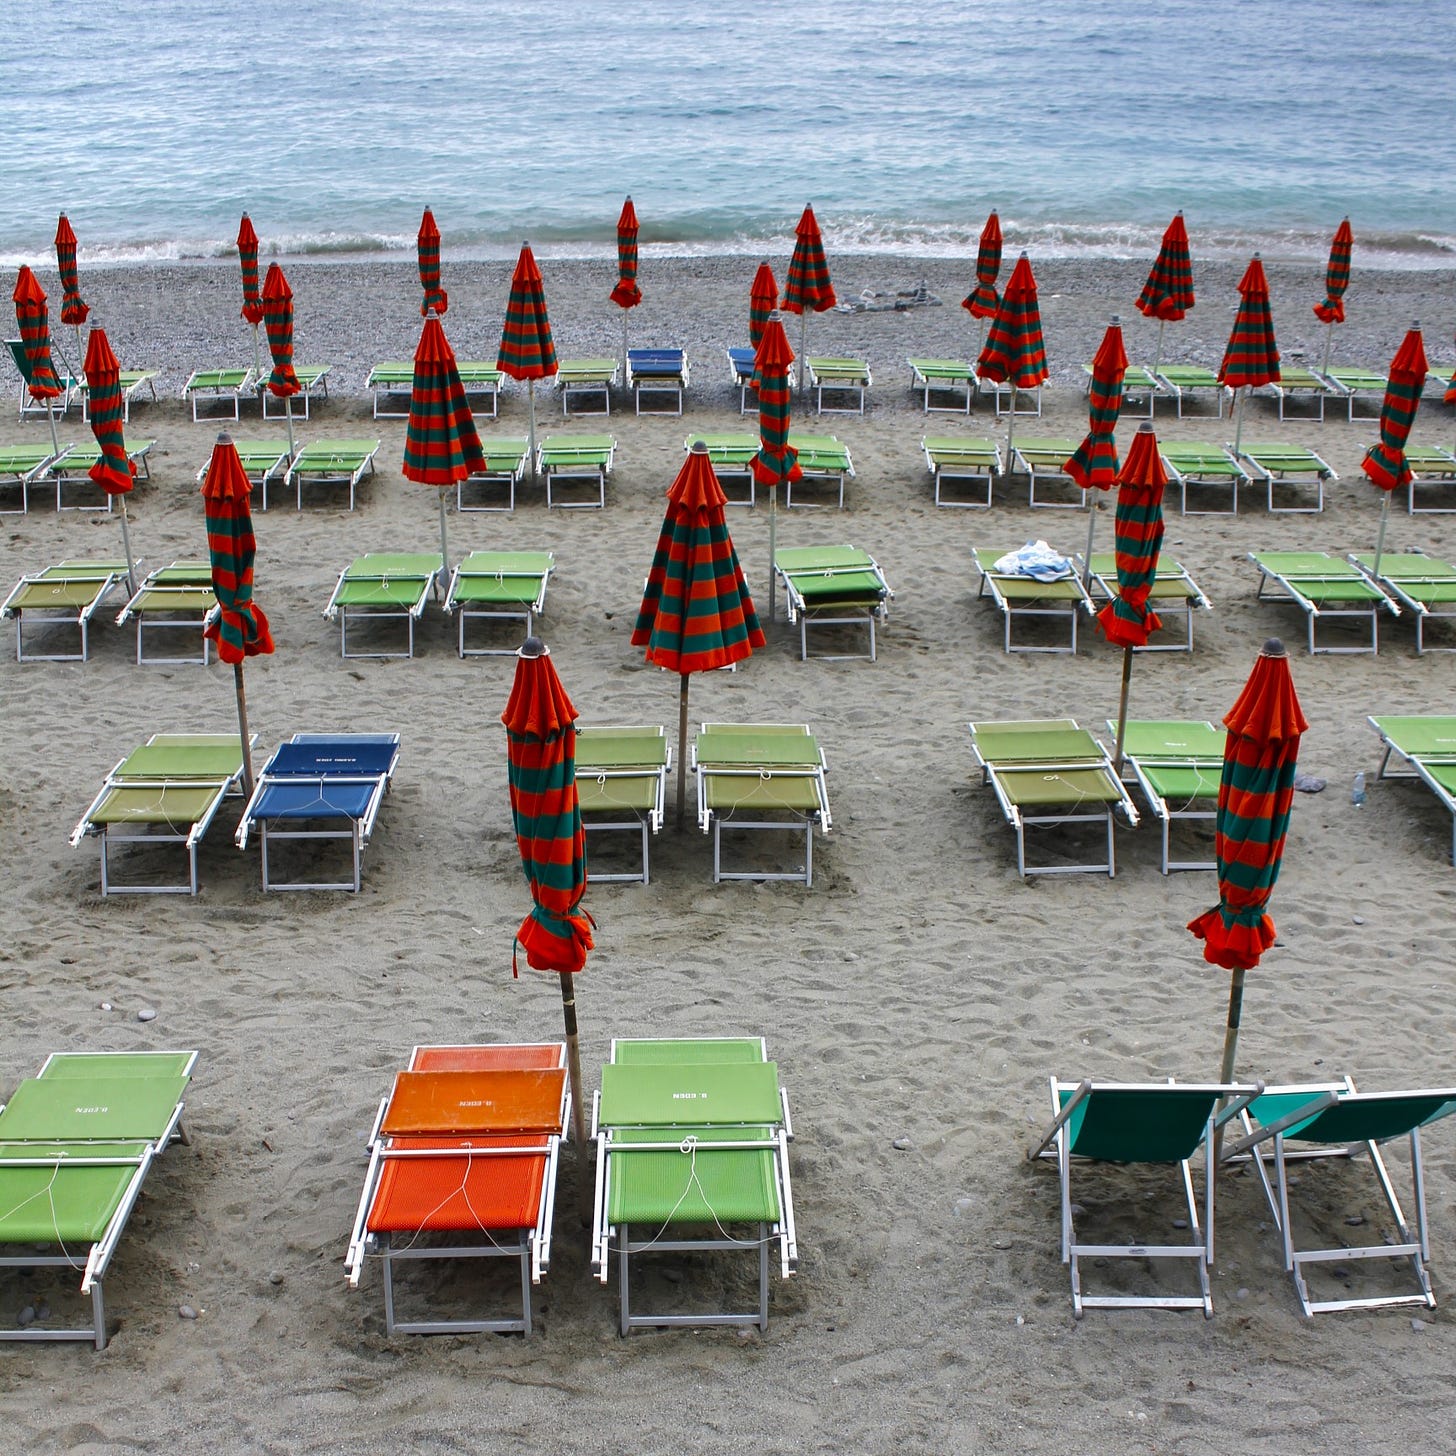 sets of green and orange umbrellas over colorful chairs on a beach.